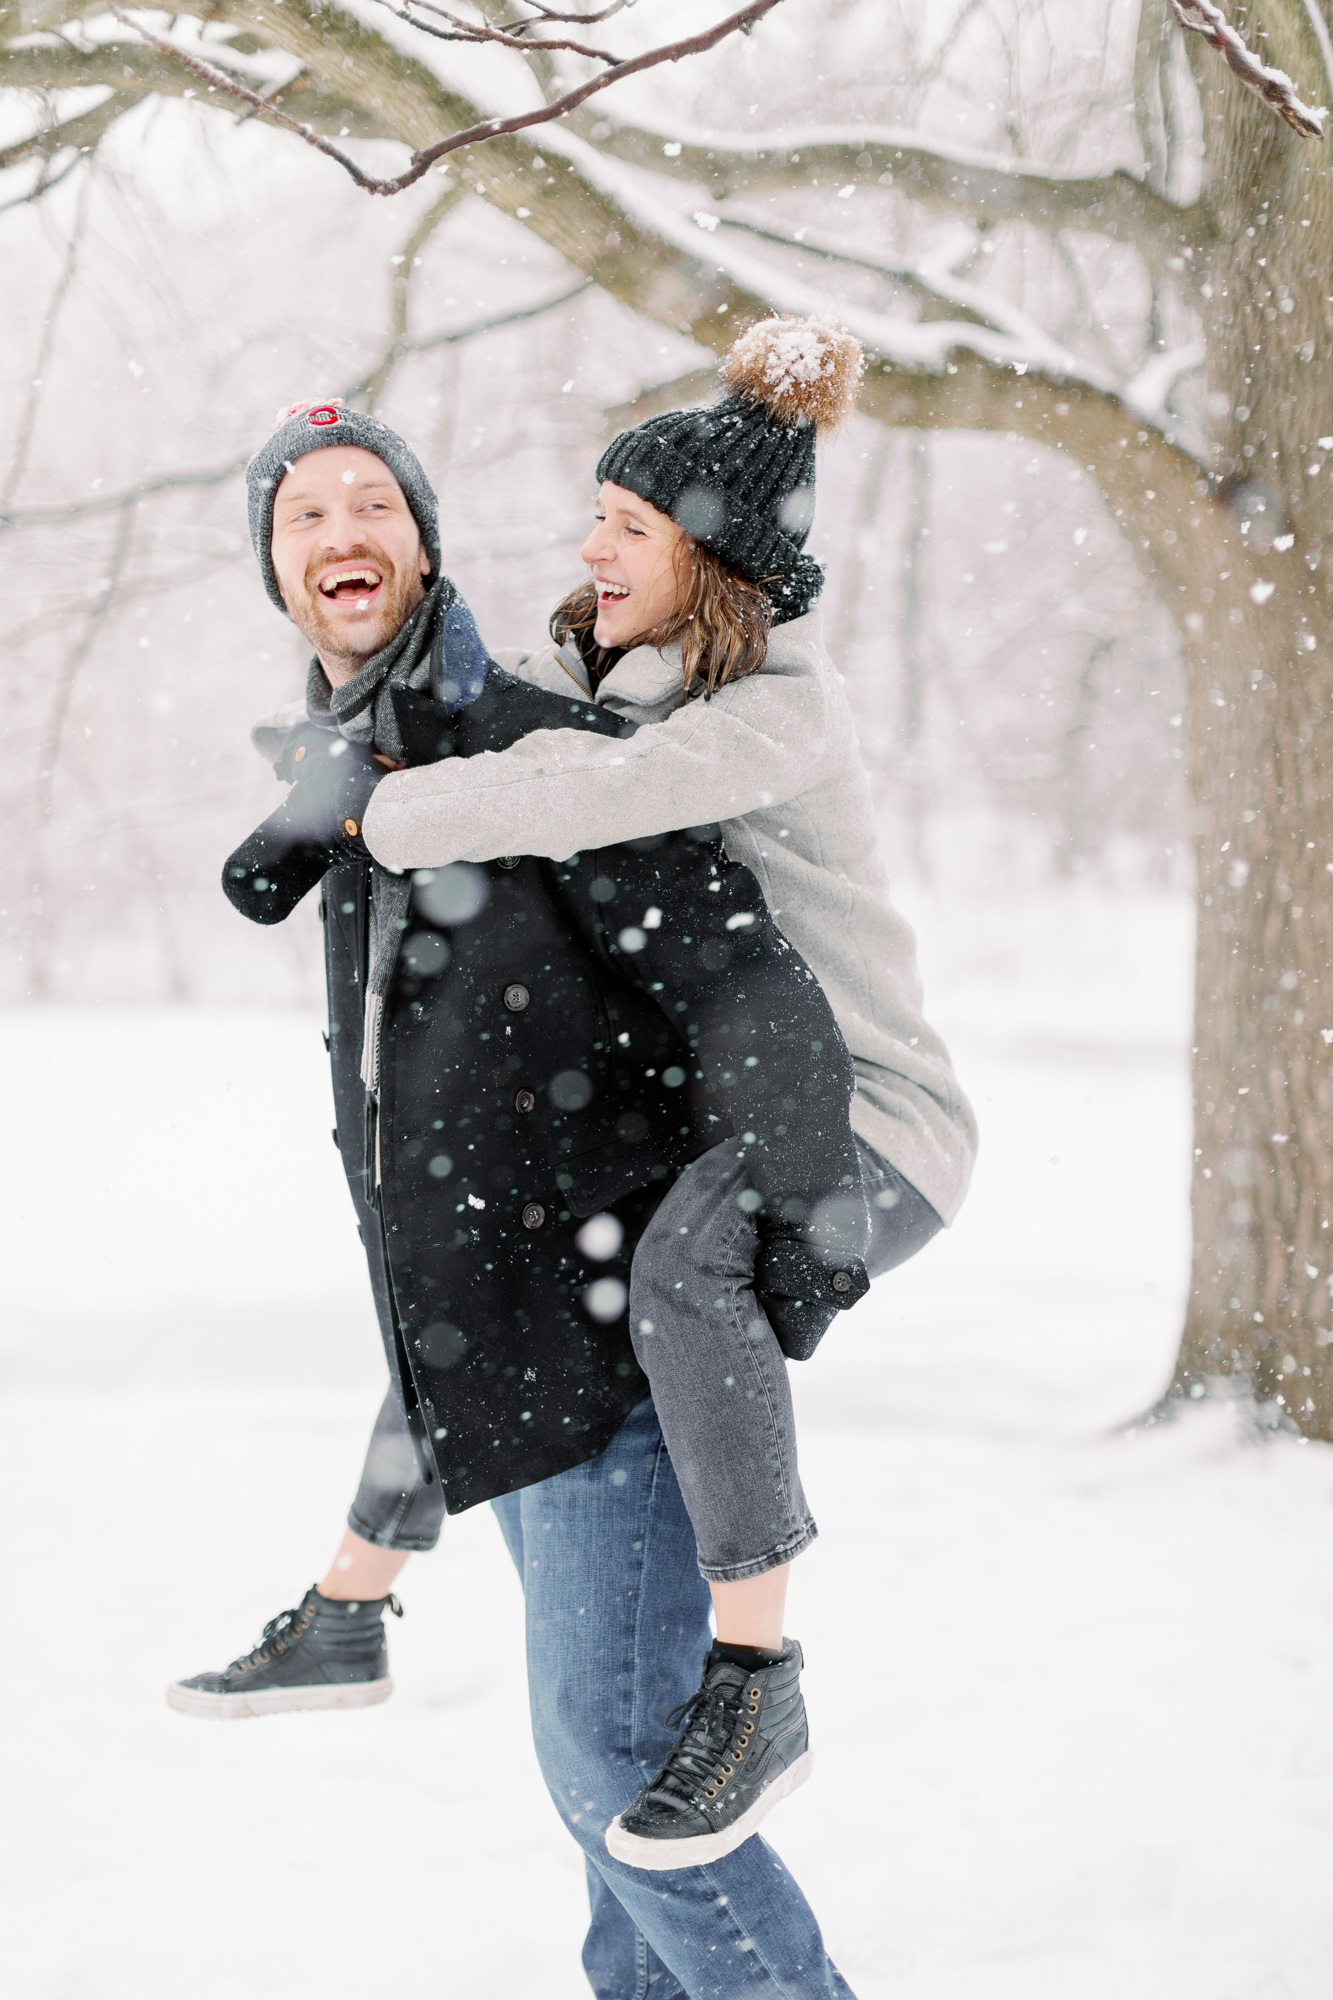 Fun and Snowy Engagement Photos in Prospect Park